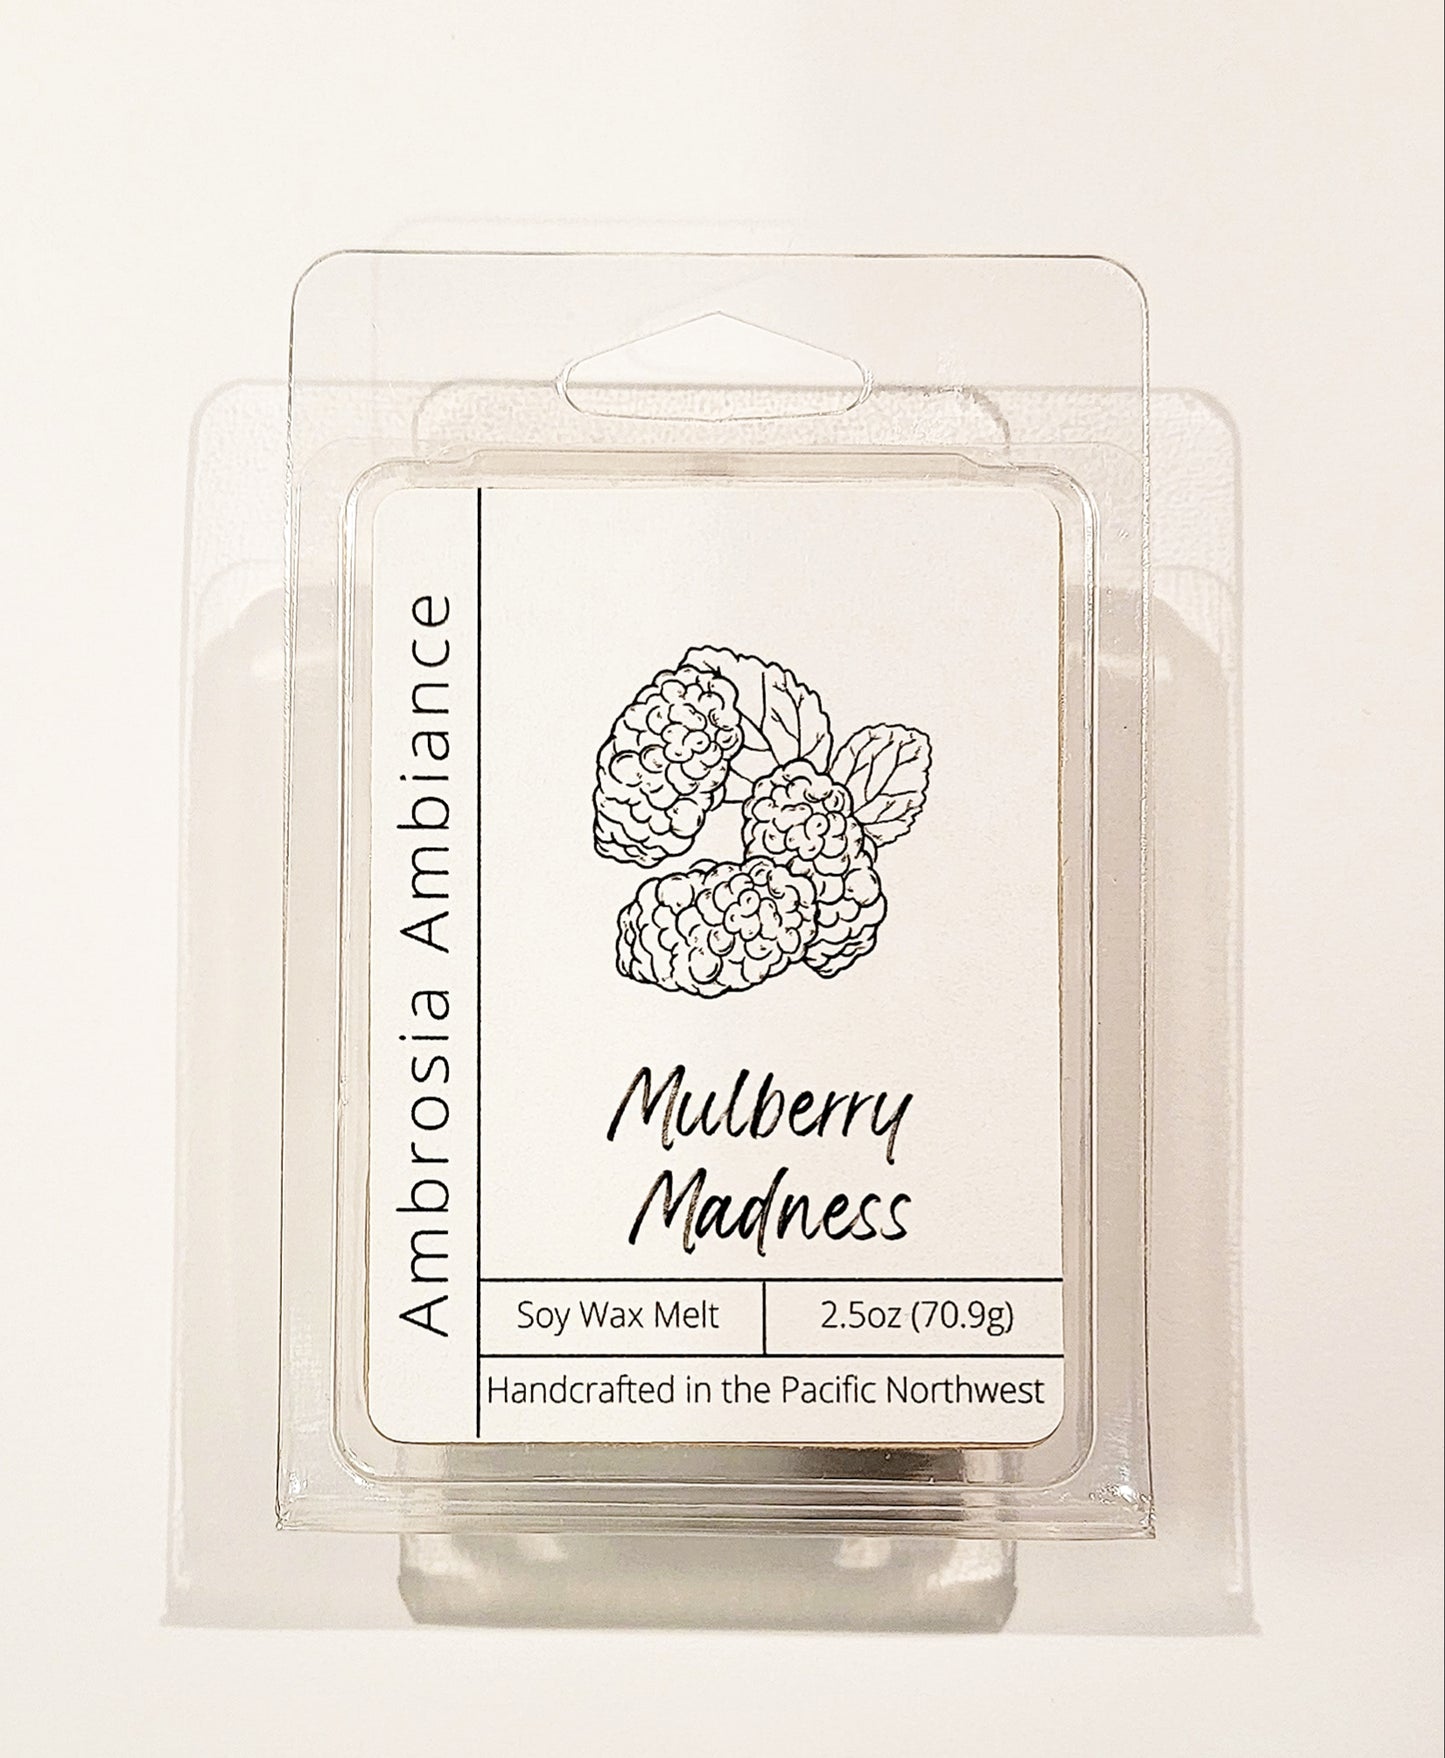 Mulberry Madness| Soy Wax Melt